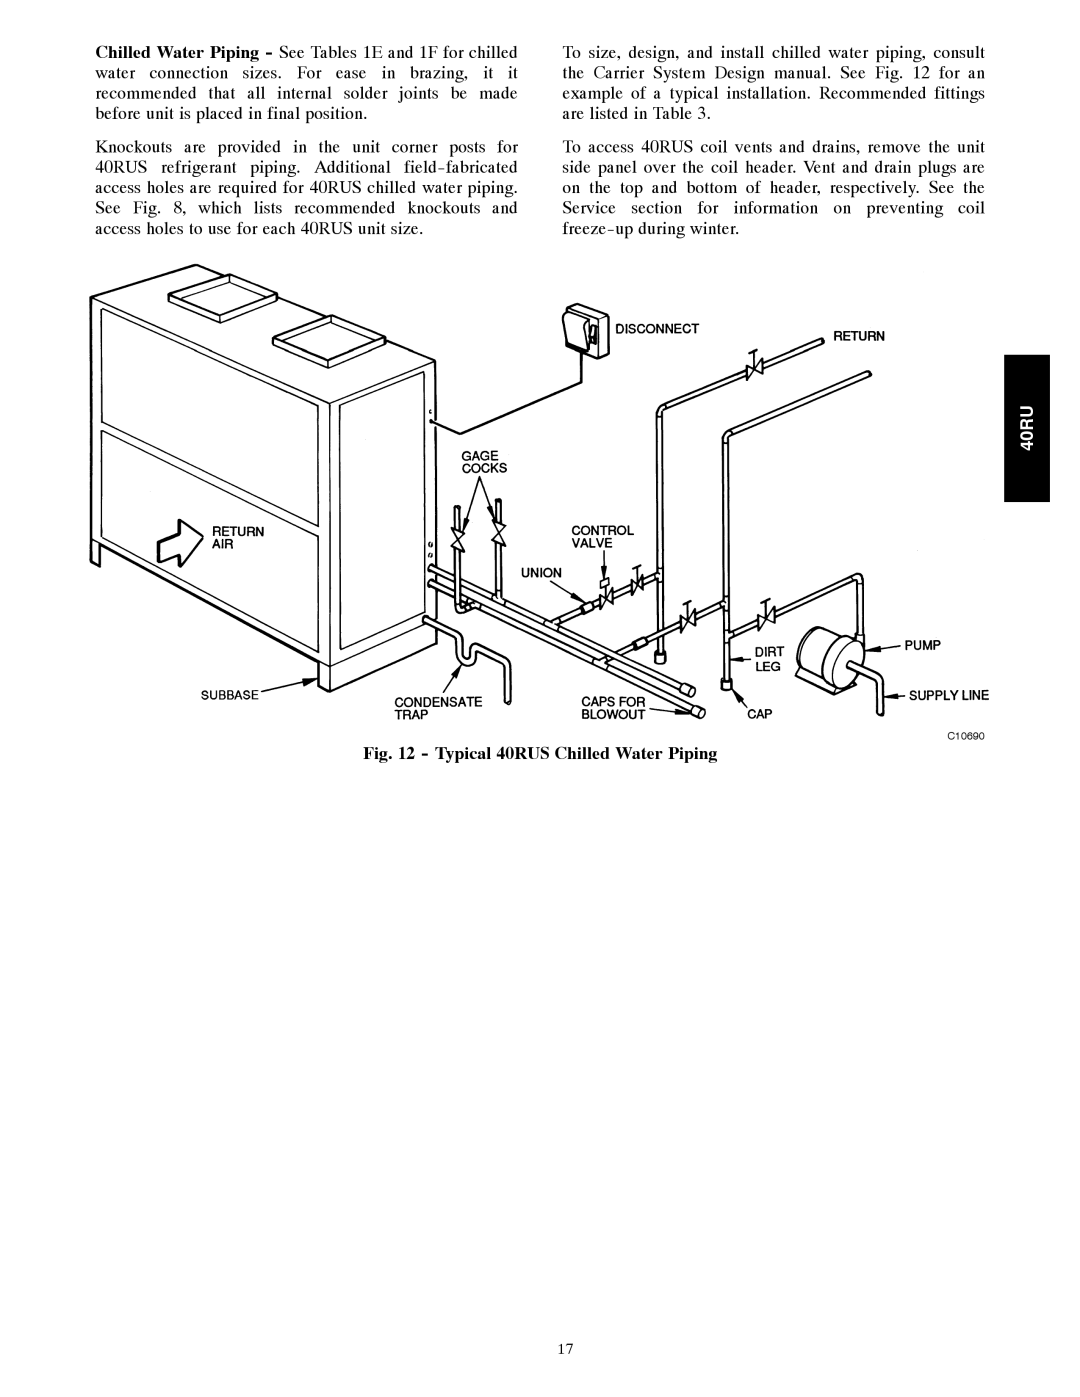 Carrier manual Typical 40RUS Chilled Water Piping, C10690 